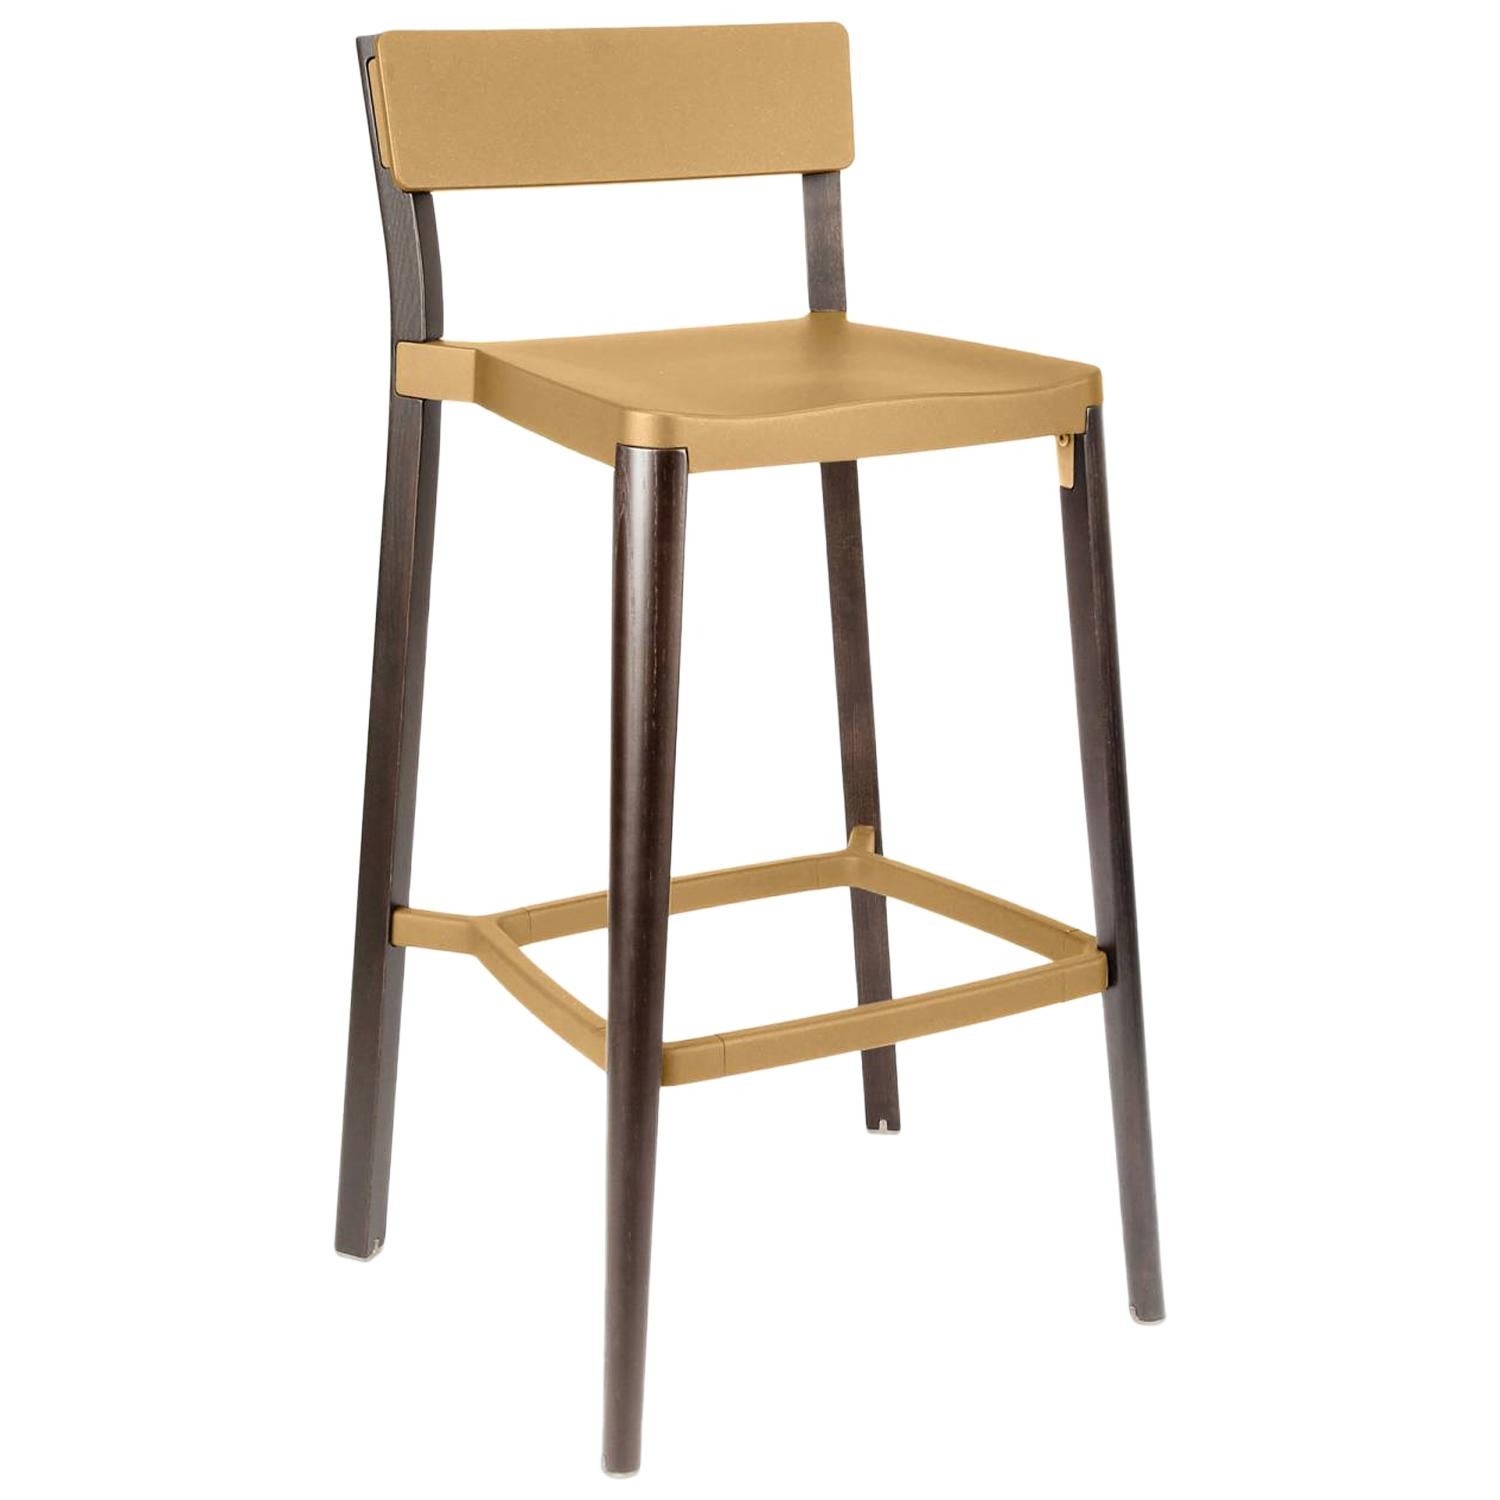 Emeco Lancaster Barstool in Sand Aluminum & Dark Ash by Michael Young 